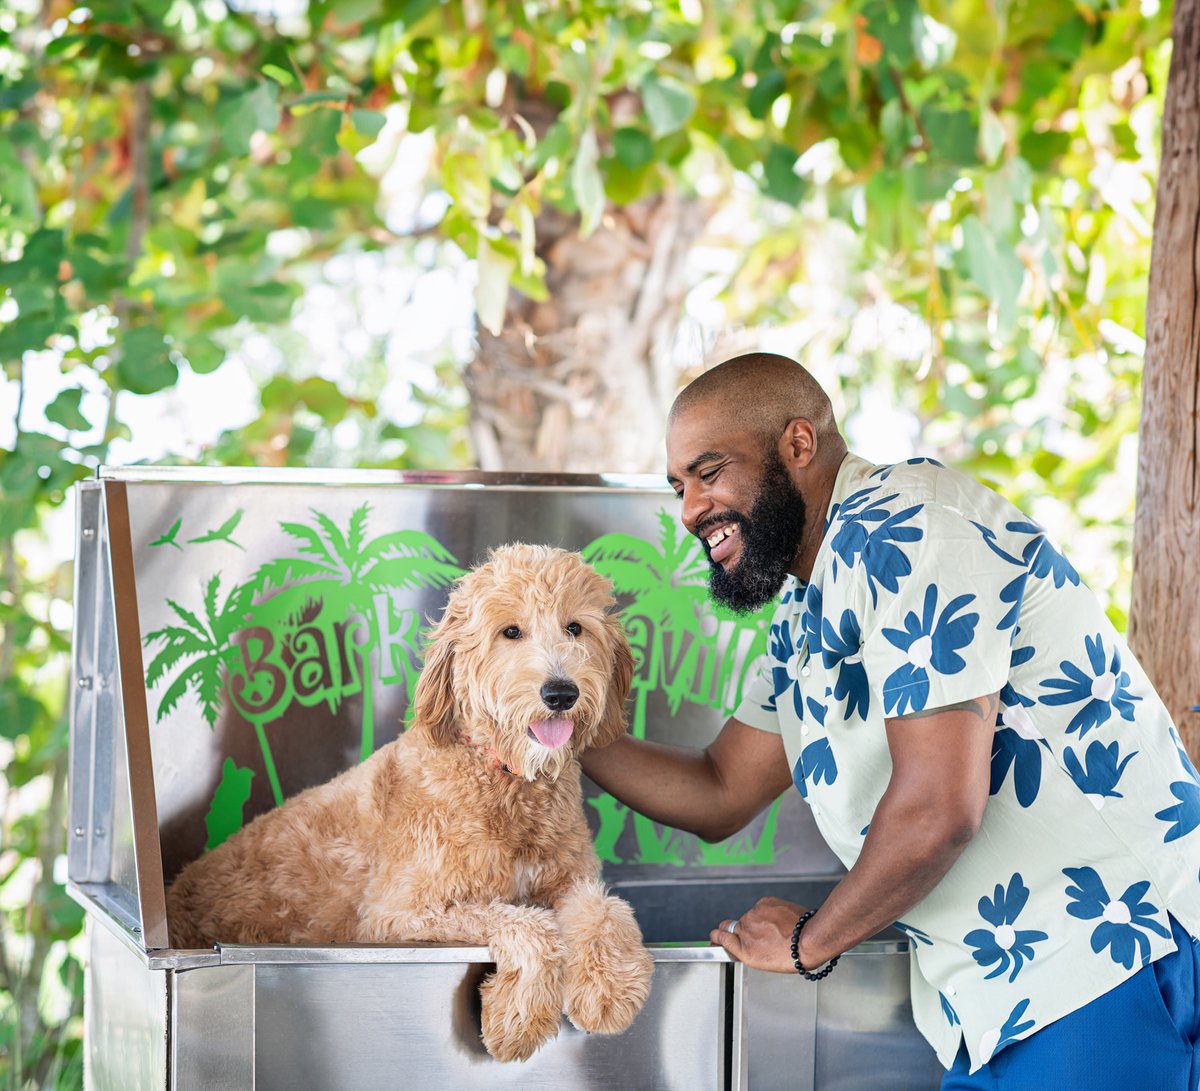 At Camp Margaritaville Auburndale, the paw-sibilites are endless! 🐾 Take your pup to one of four Bark-aritaville Dog Parks, located throughout the resort. Or venture beyond the resort to Lake Myrtle's dog parks, less than a mile away! When they're finished playing, give them a